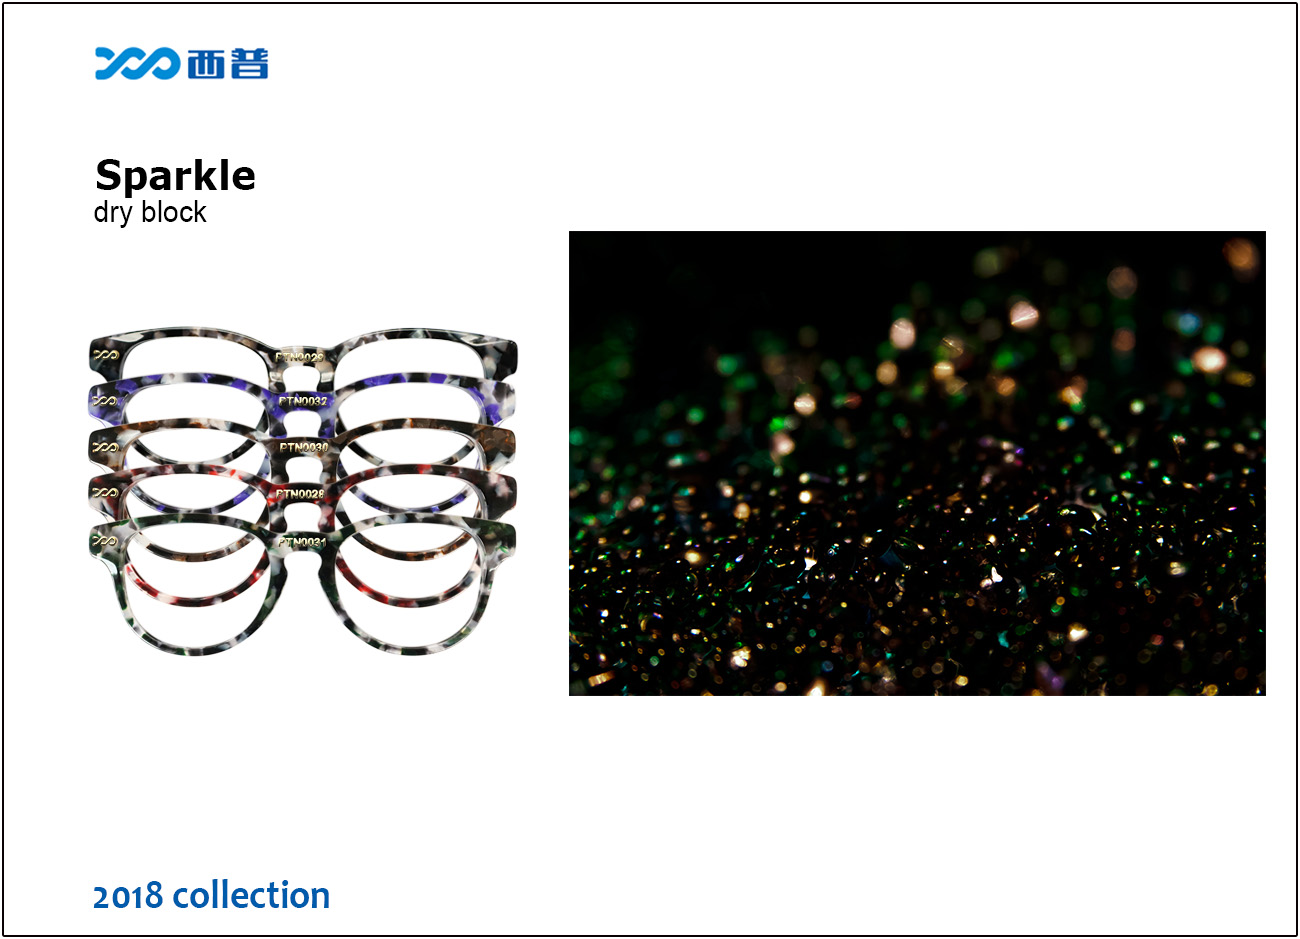 2018 collection of Sparkle 